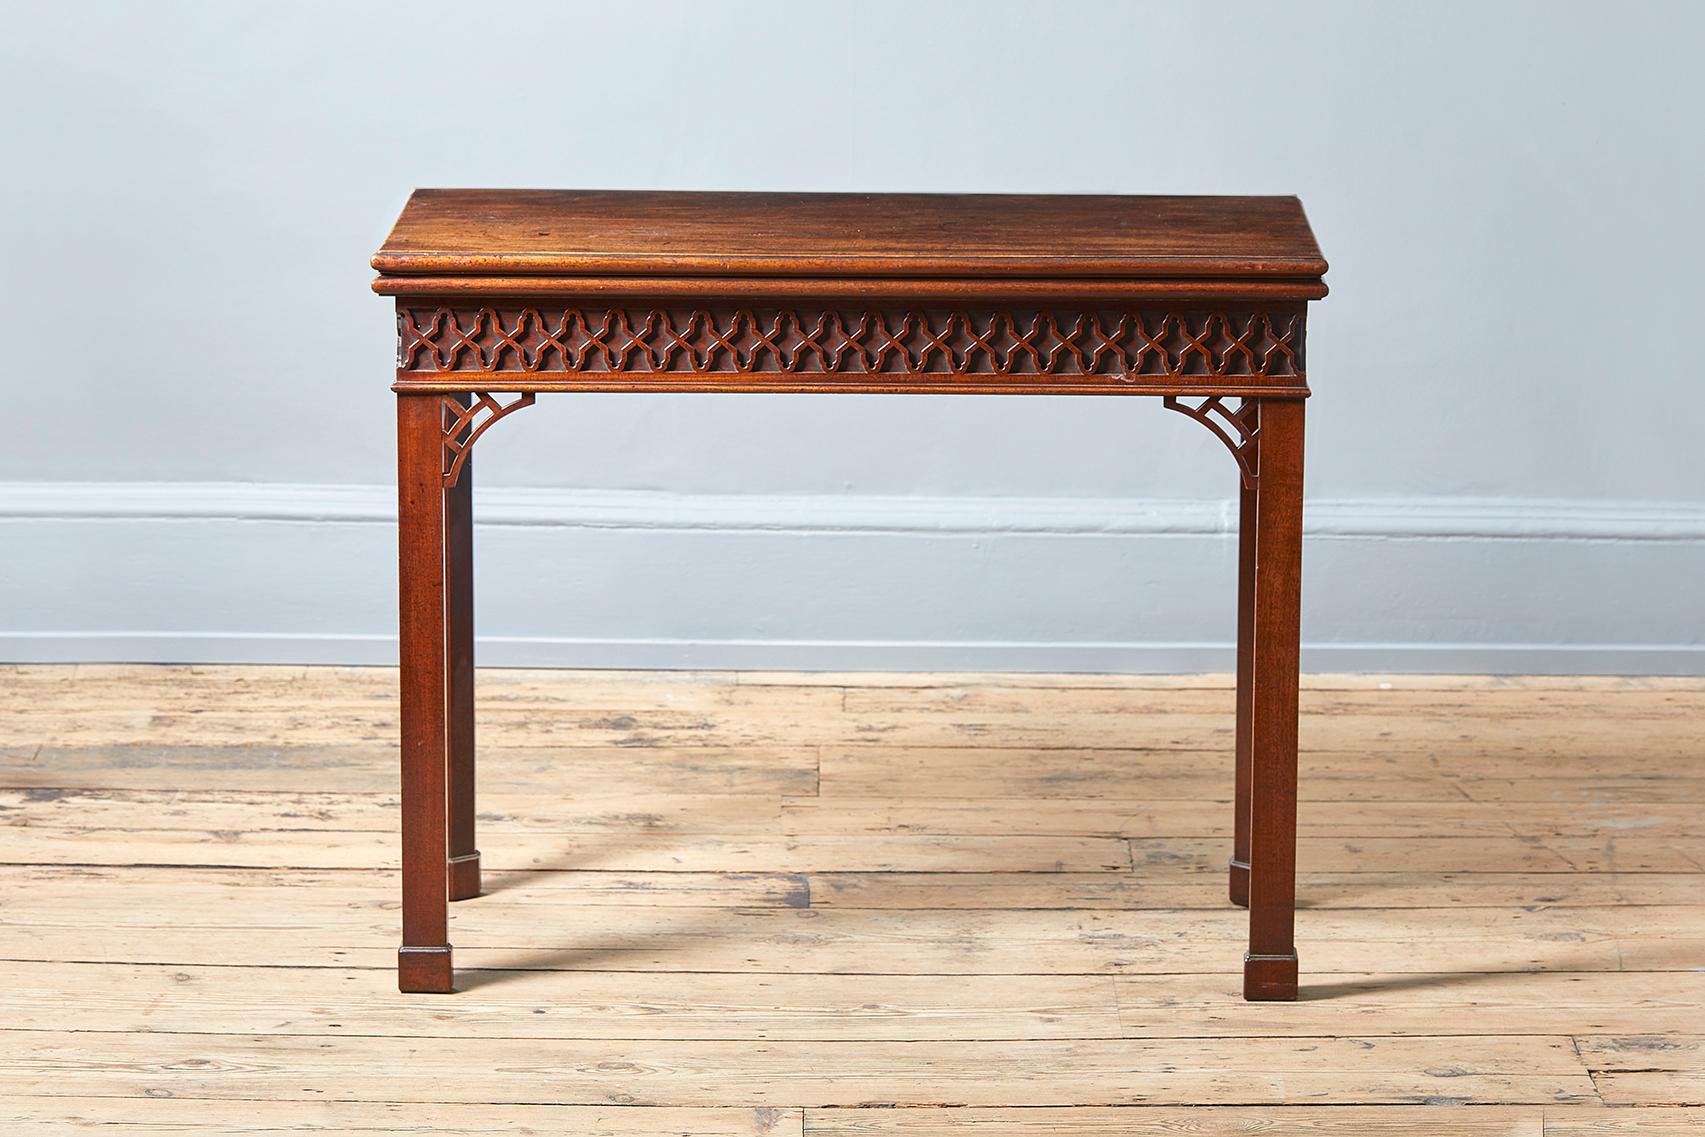 A George III mahogany folding card table, circa 1760, the moulded top opening to a baize lined interior, the blind fretwork decorated frieze above square section legs surmounted by pierced brackets and on plinth feet, hinges stamped H Tibats.

The